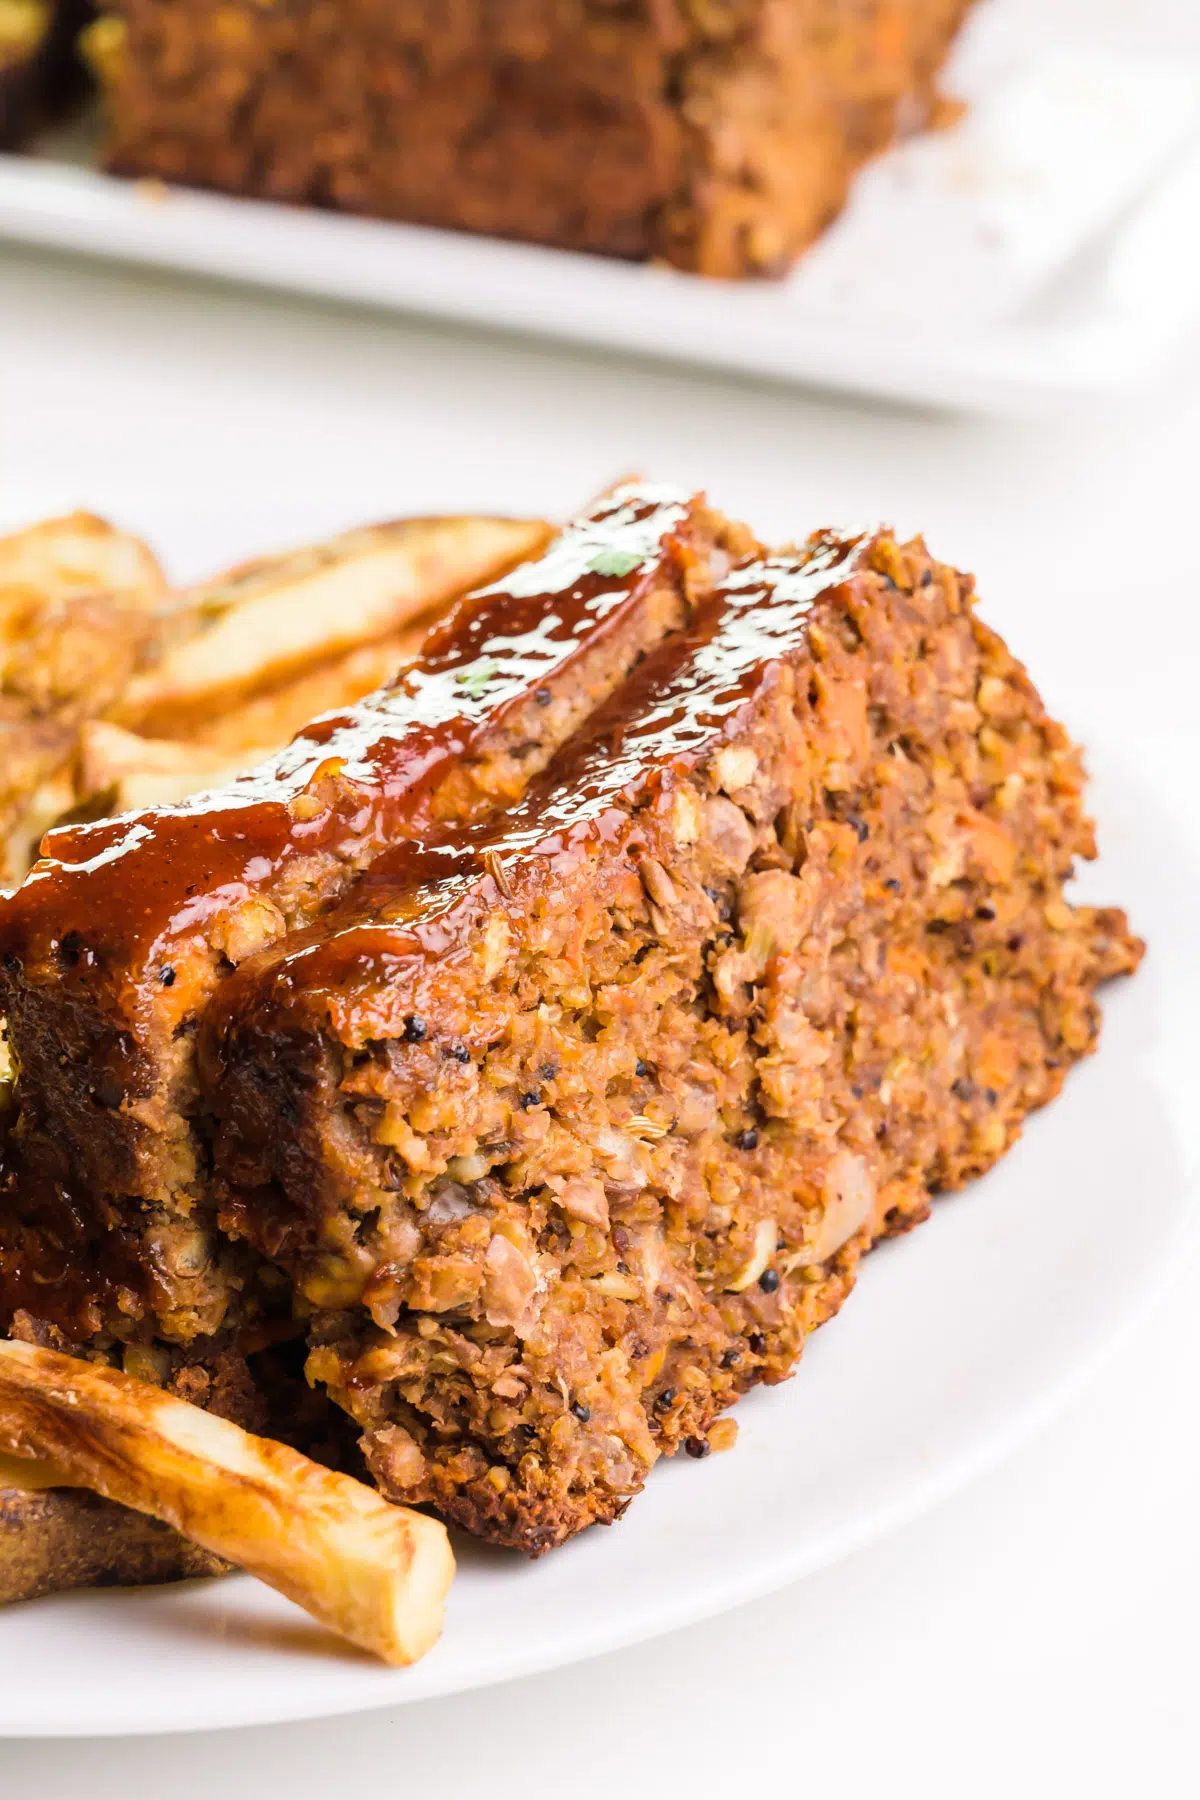 Two slices of vegan meatloaf sit beside French fries on a plate. Another plate of meatloaf is in the background.